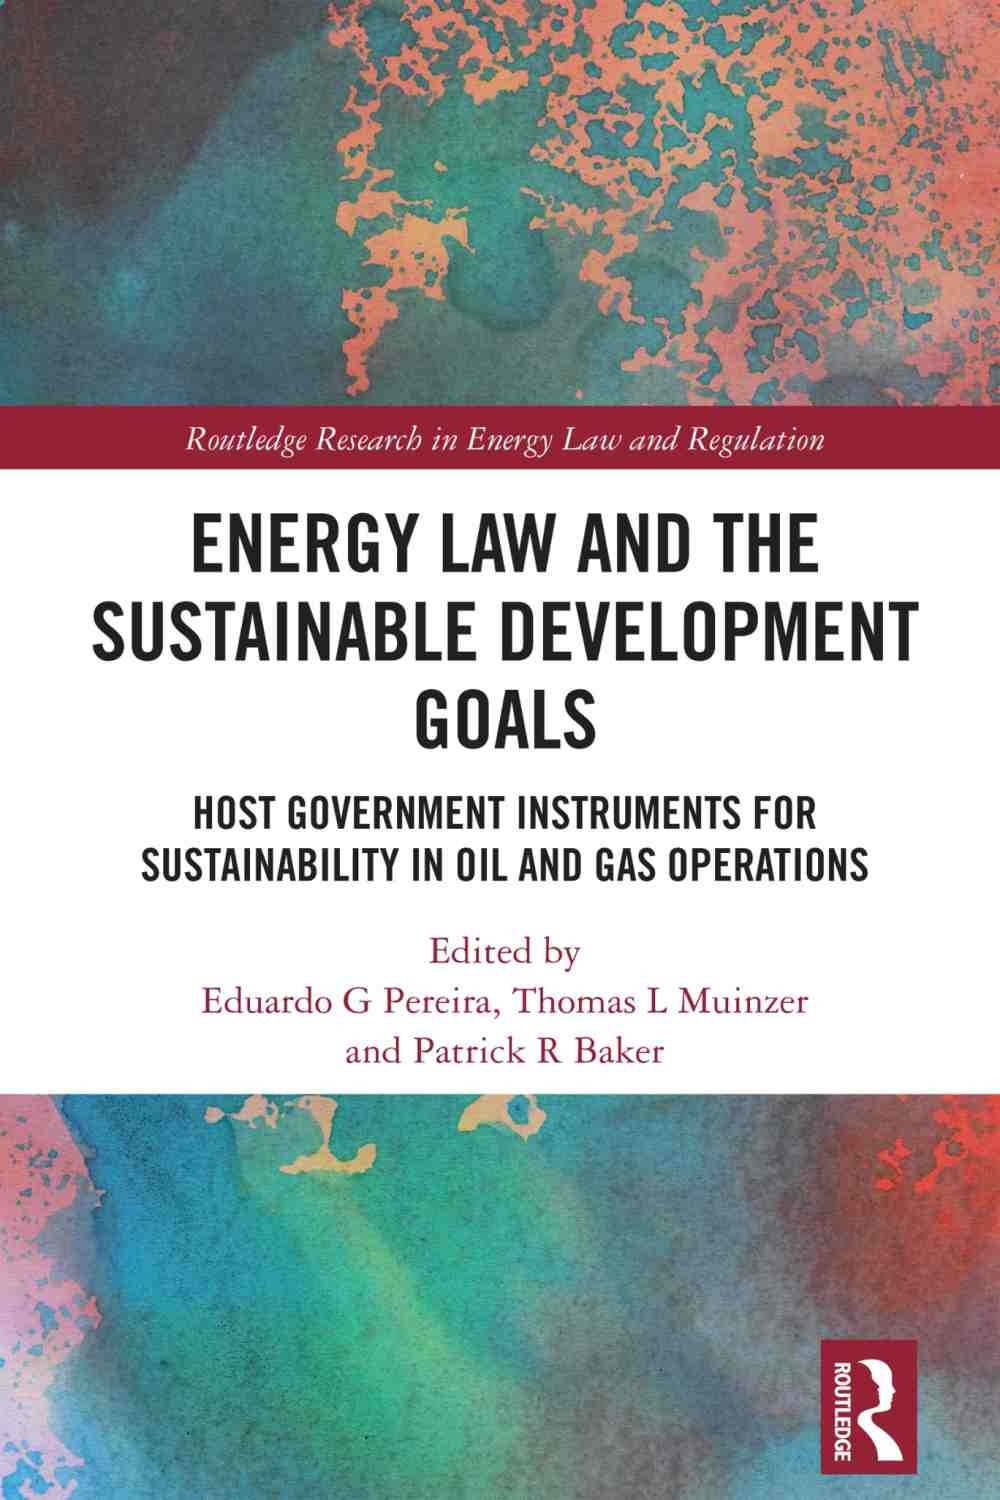 Energy Law and the Sustainable Development Goals: Host Government Instruments for Sustainability in Oil and Gas Operations